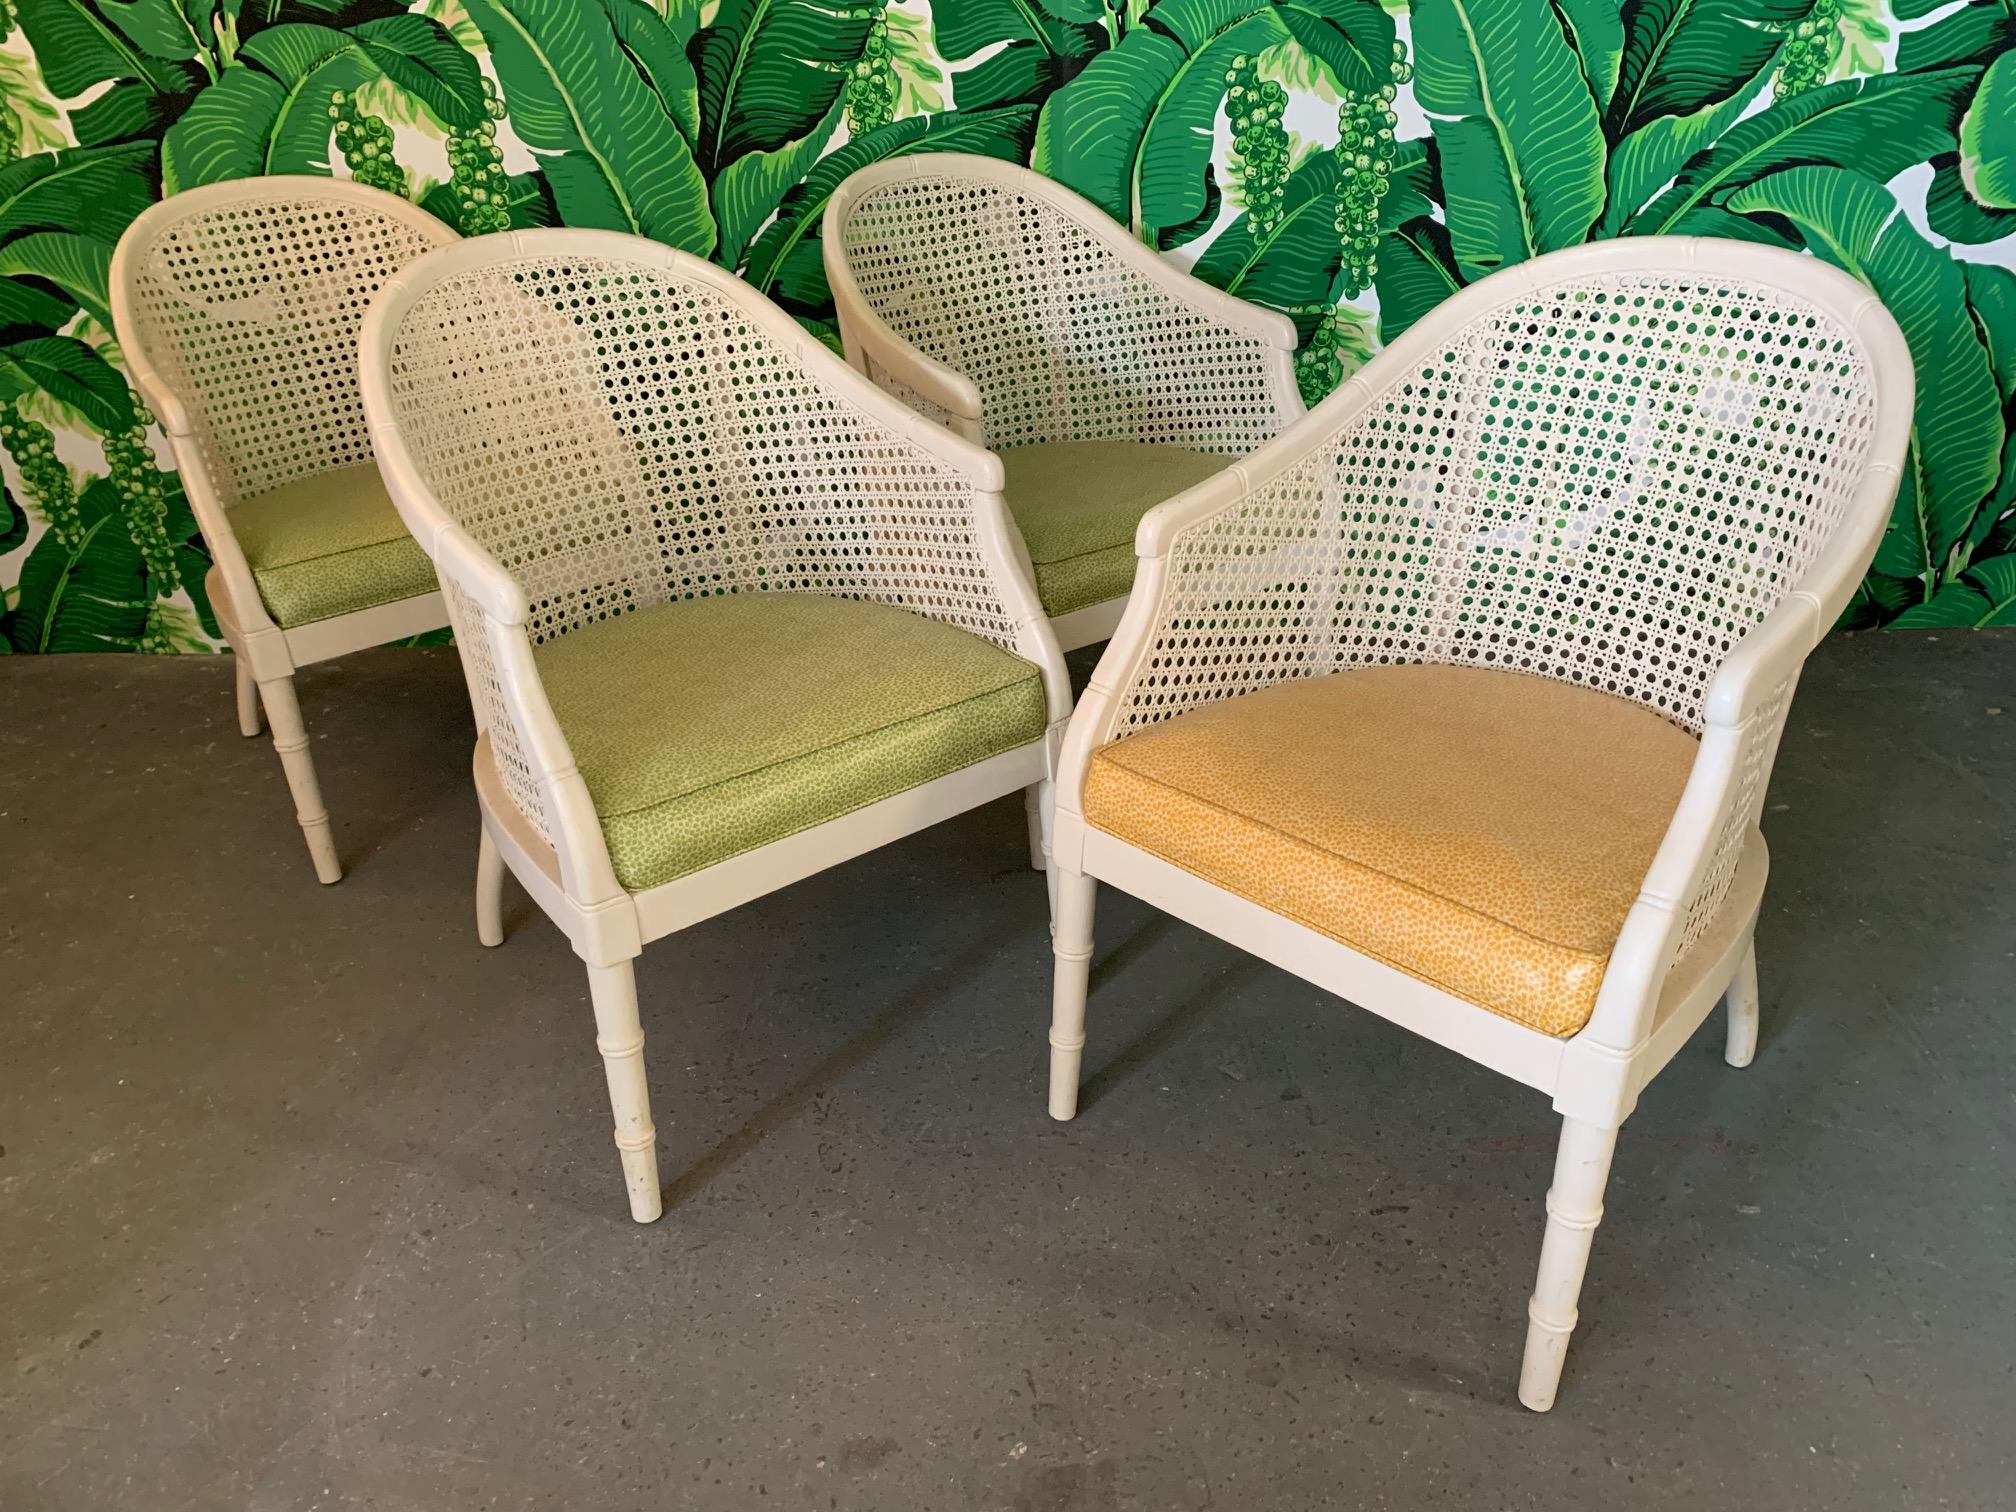 Set of 4 barrel chairs feature cane backs and vinyl upholstery in a fun vintage print. One chair in yellow vinyl and three in green. Very good vintage condition with minor imperfections consistent with age.